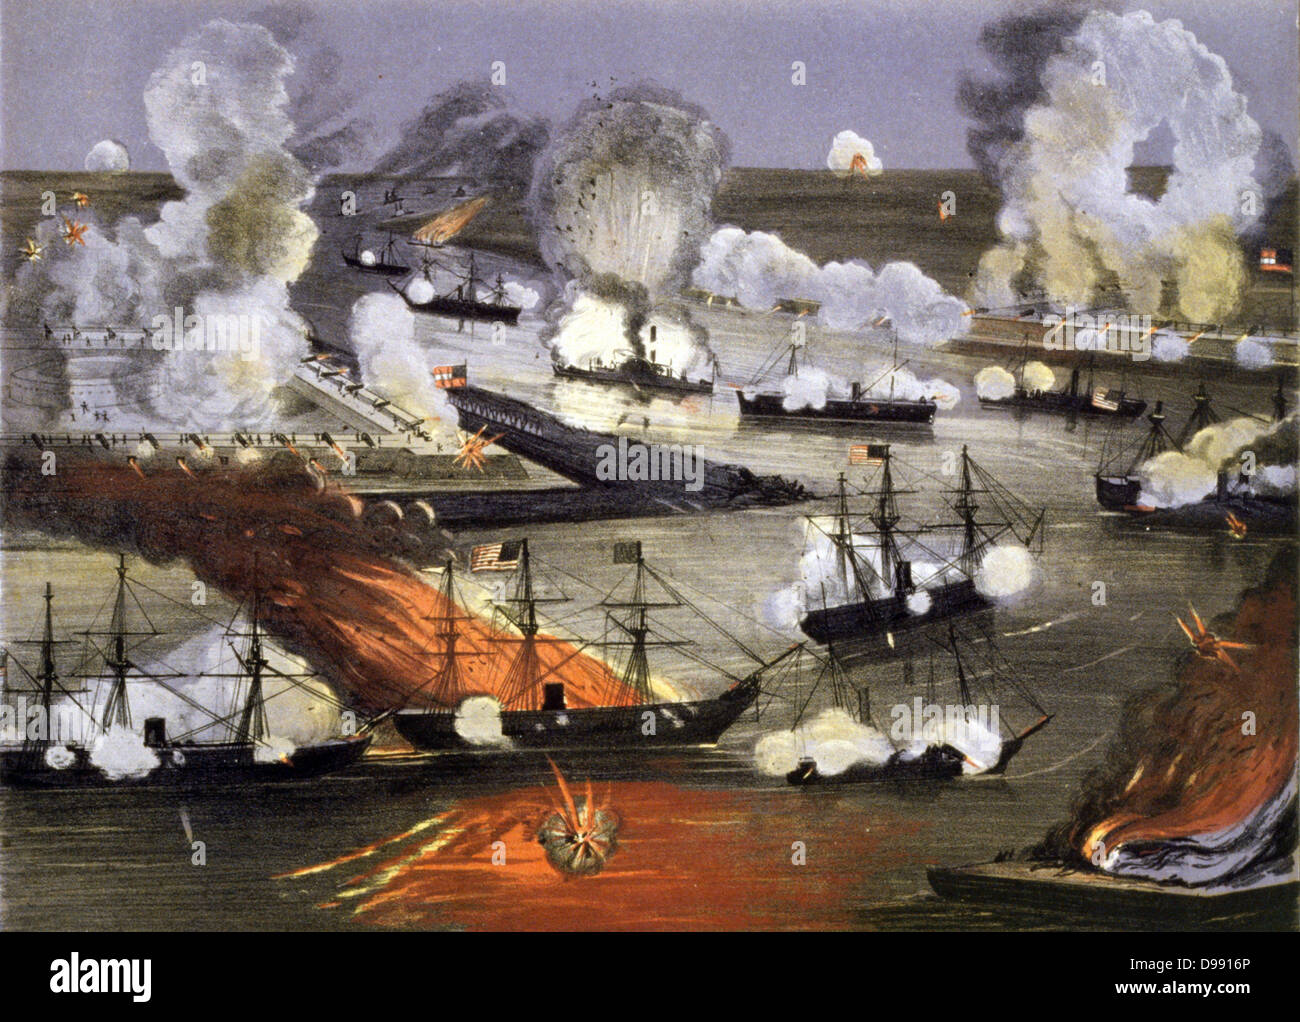 American Civil War 1861-1865: The Capture of New Orleans 25 April to 1 May 1862. The capture of the largest Confederate city by the Union was a turning point in the war. Naval Battle Fire Gunfire Explosion Steam Ship Stock Photo